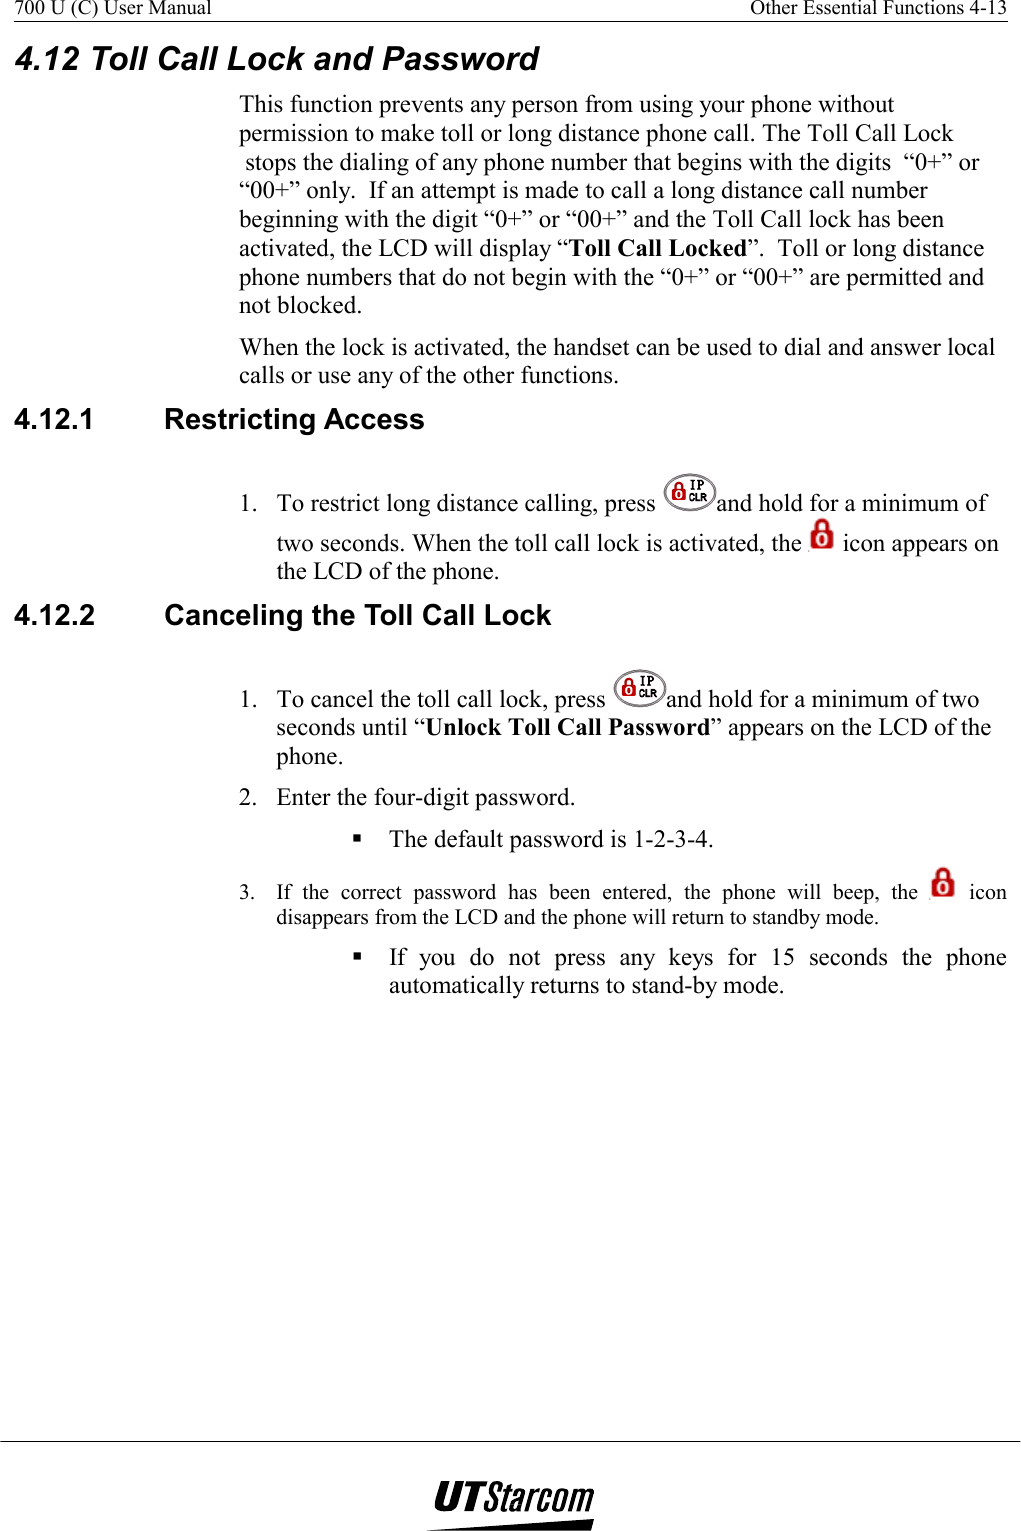 700 U (C) User Manual    Other Essential Functions 4-13   4.12 Toll Call Lock and Password This function prevents any person from using your phone without permission to make toll or long distance phone call. The Toll Call Lock   stops the dialing of any phone number that begins with the digits  “0+” or “00+” only.  If an attempt is made to call a long distance call number beginning with the digit “0+” or “00+” and the Toll Call lock has been activated, the LCD will display “Toll Call Locked”.  Toll or long distance phone numbers that do not begin with the “0+” or “00+” are permitted and not blocked. When the lock is activated, the handset can be used to dial and answer local calls or use any of the other functions. 4.12.1 Restricting Access  1.  To restrict long distance calling, press  and hold for a minimum of two seconds. When the toll call lock is activated, the   icon appears on the LCD of the phone. 4.12.2  Canceling the Toll Call Lock 1.  To cancel the toll call lock, press  and hold for a minimum of two seconds until “Unlock Toll Call Password” appears on the LCD of the phone. 2.  Enter the four-digit password.  The default password is 1-2-3-4. 3.  If the correct password has been entered, the phone will beep, the   icon disappears from the LCD and the phone will return to standby mode.  If you do not press any keys for 15 seconds the phone automatically returns to stand-by mode. 